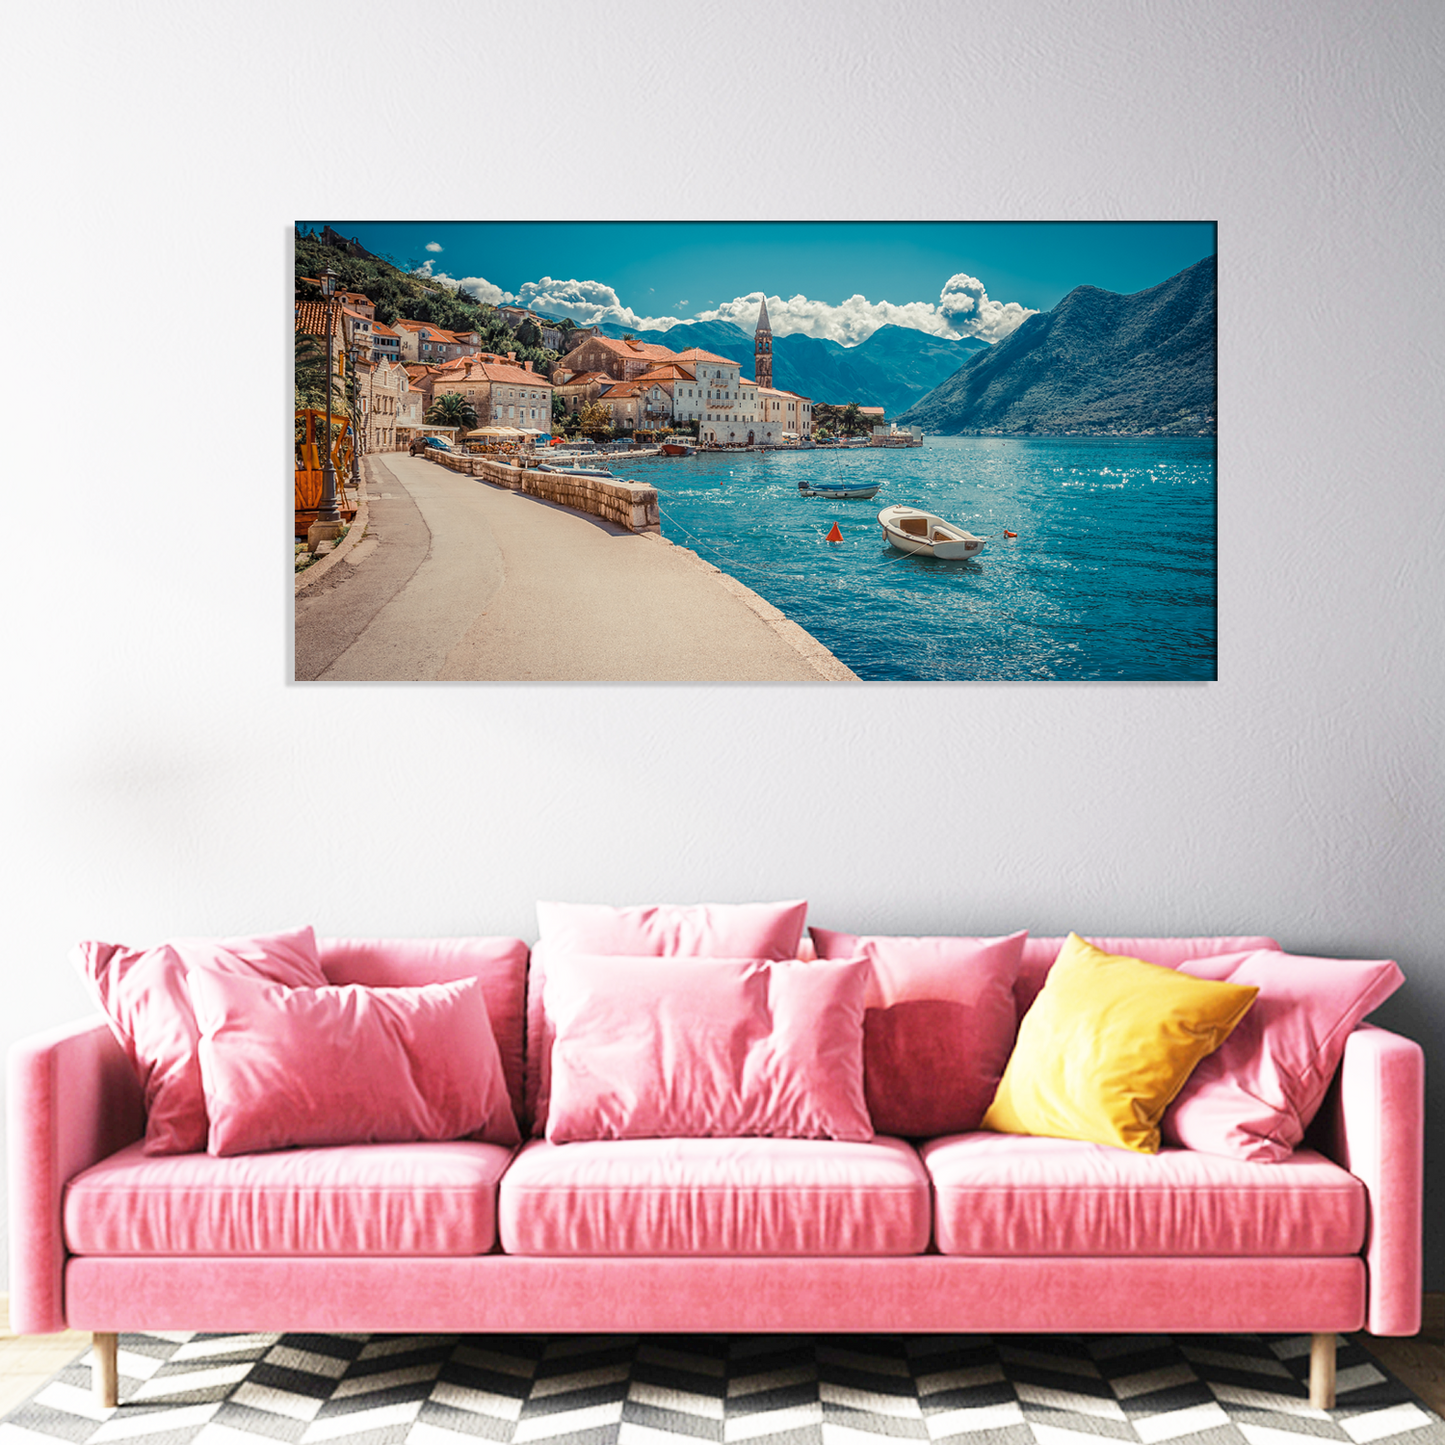 Mountains & River Canvas Print Wall Painting